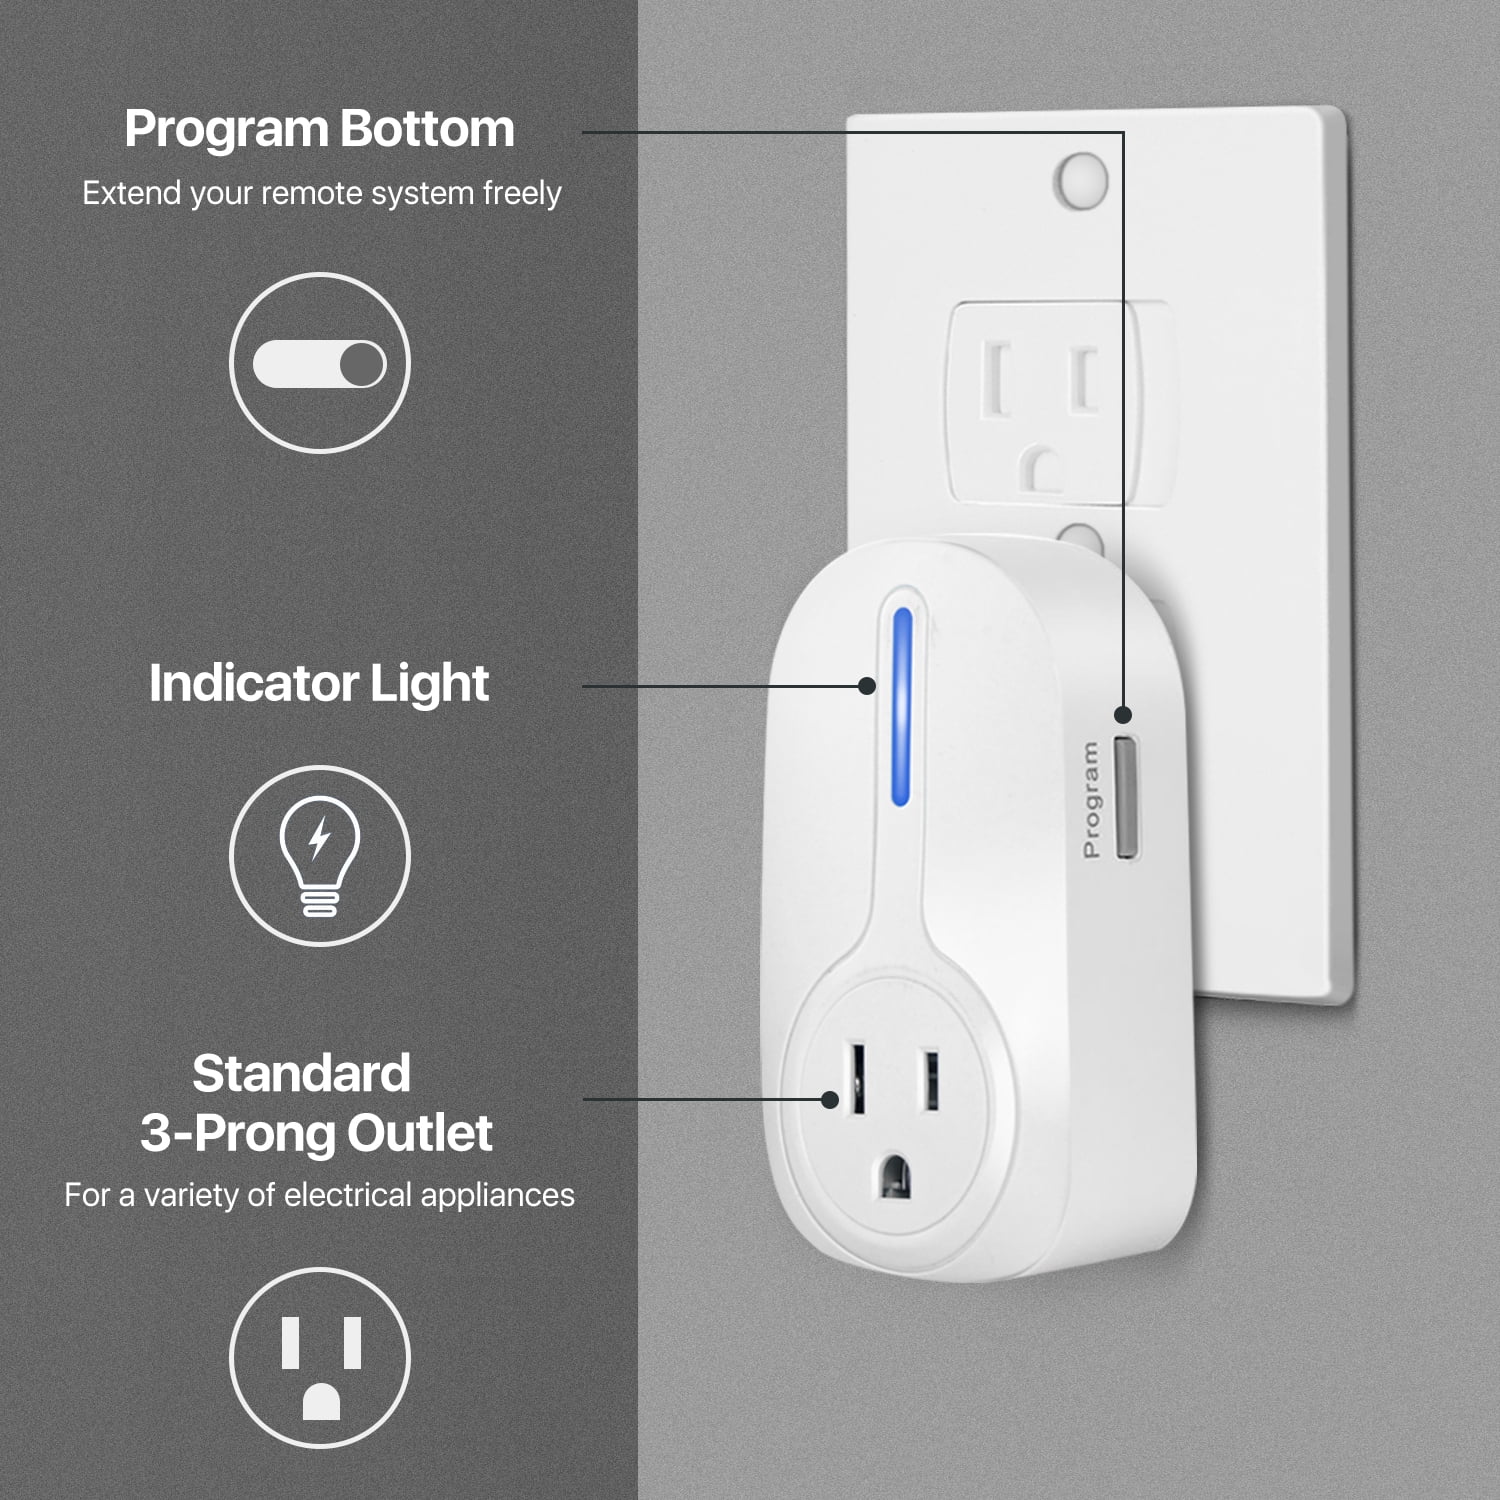 Wireless Remote Control Plug Outlet With Remote On Off Switch (5 Pack 2  Remotes) Electrical Power Outlet Wireless Switch for Light Indoor Home  Lamps Appliance 